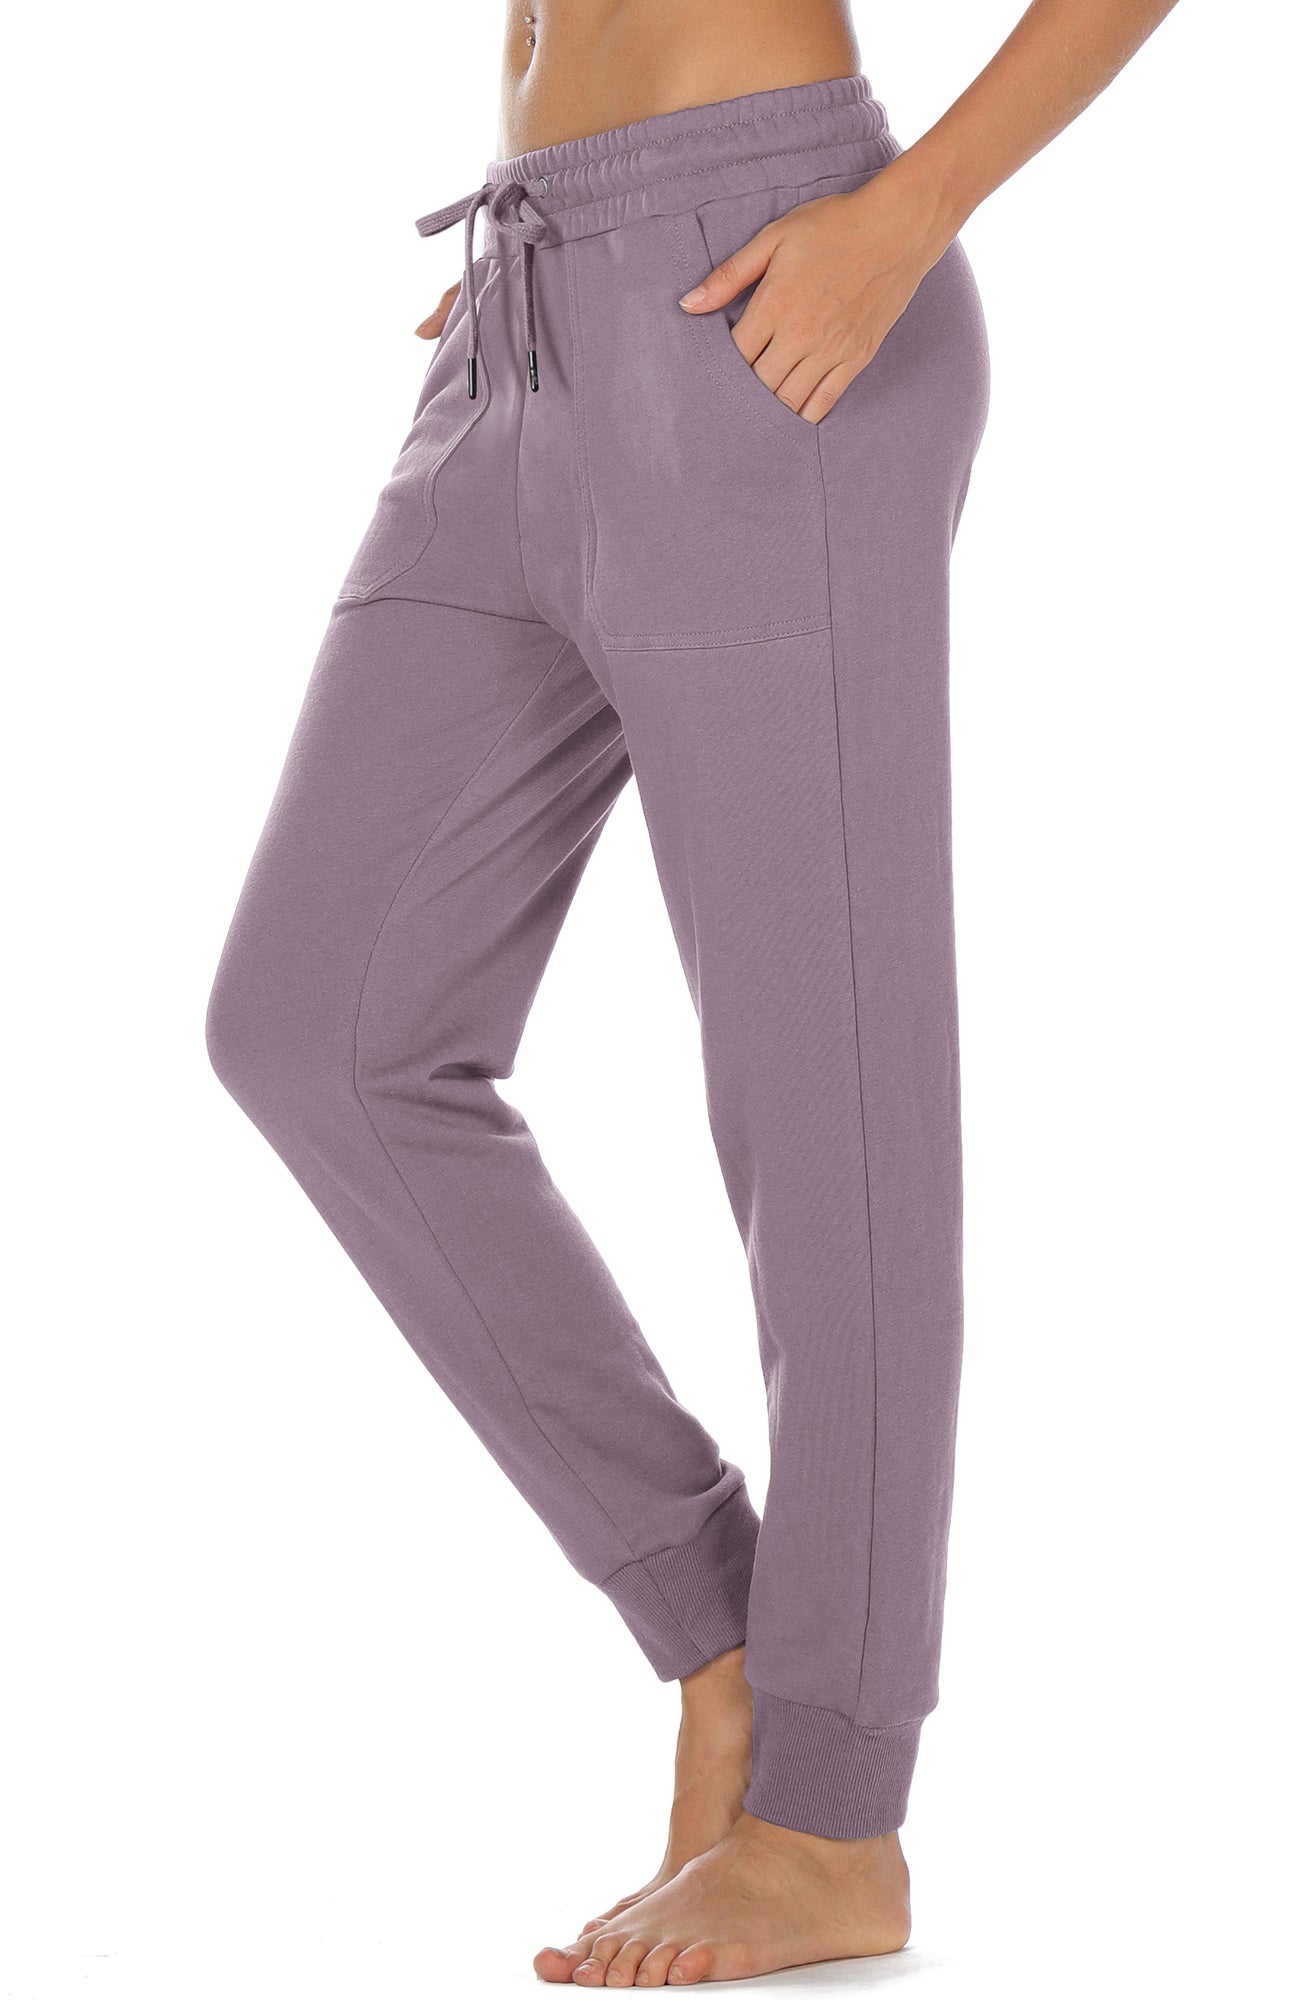 P40 icyzone Women's Active Joggers Sweatpants - Athletic Yoga Lounge Pants  with Pockets